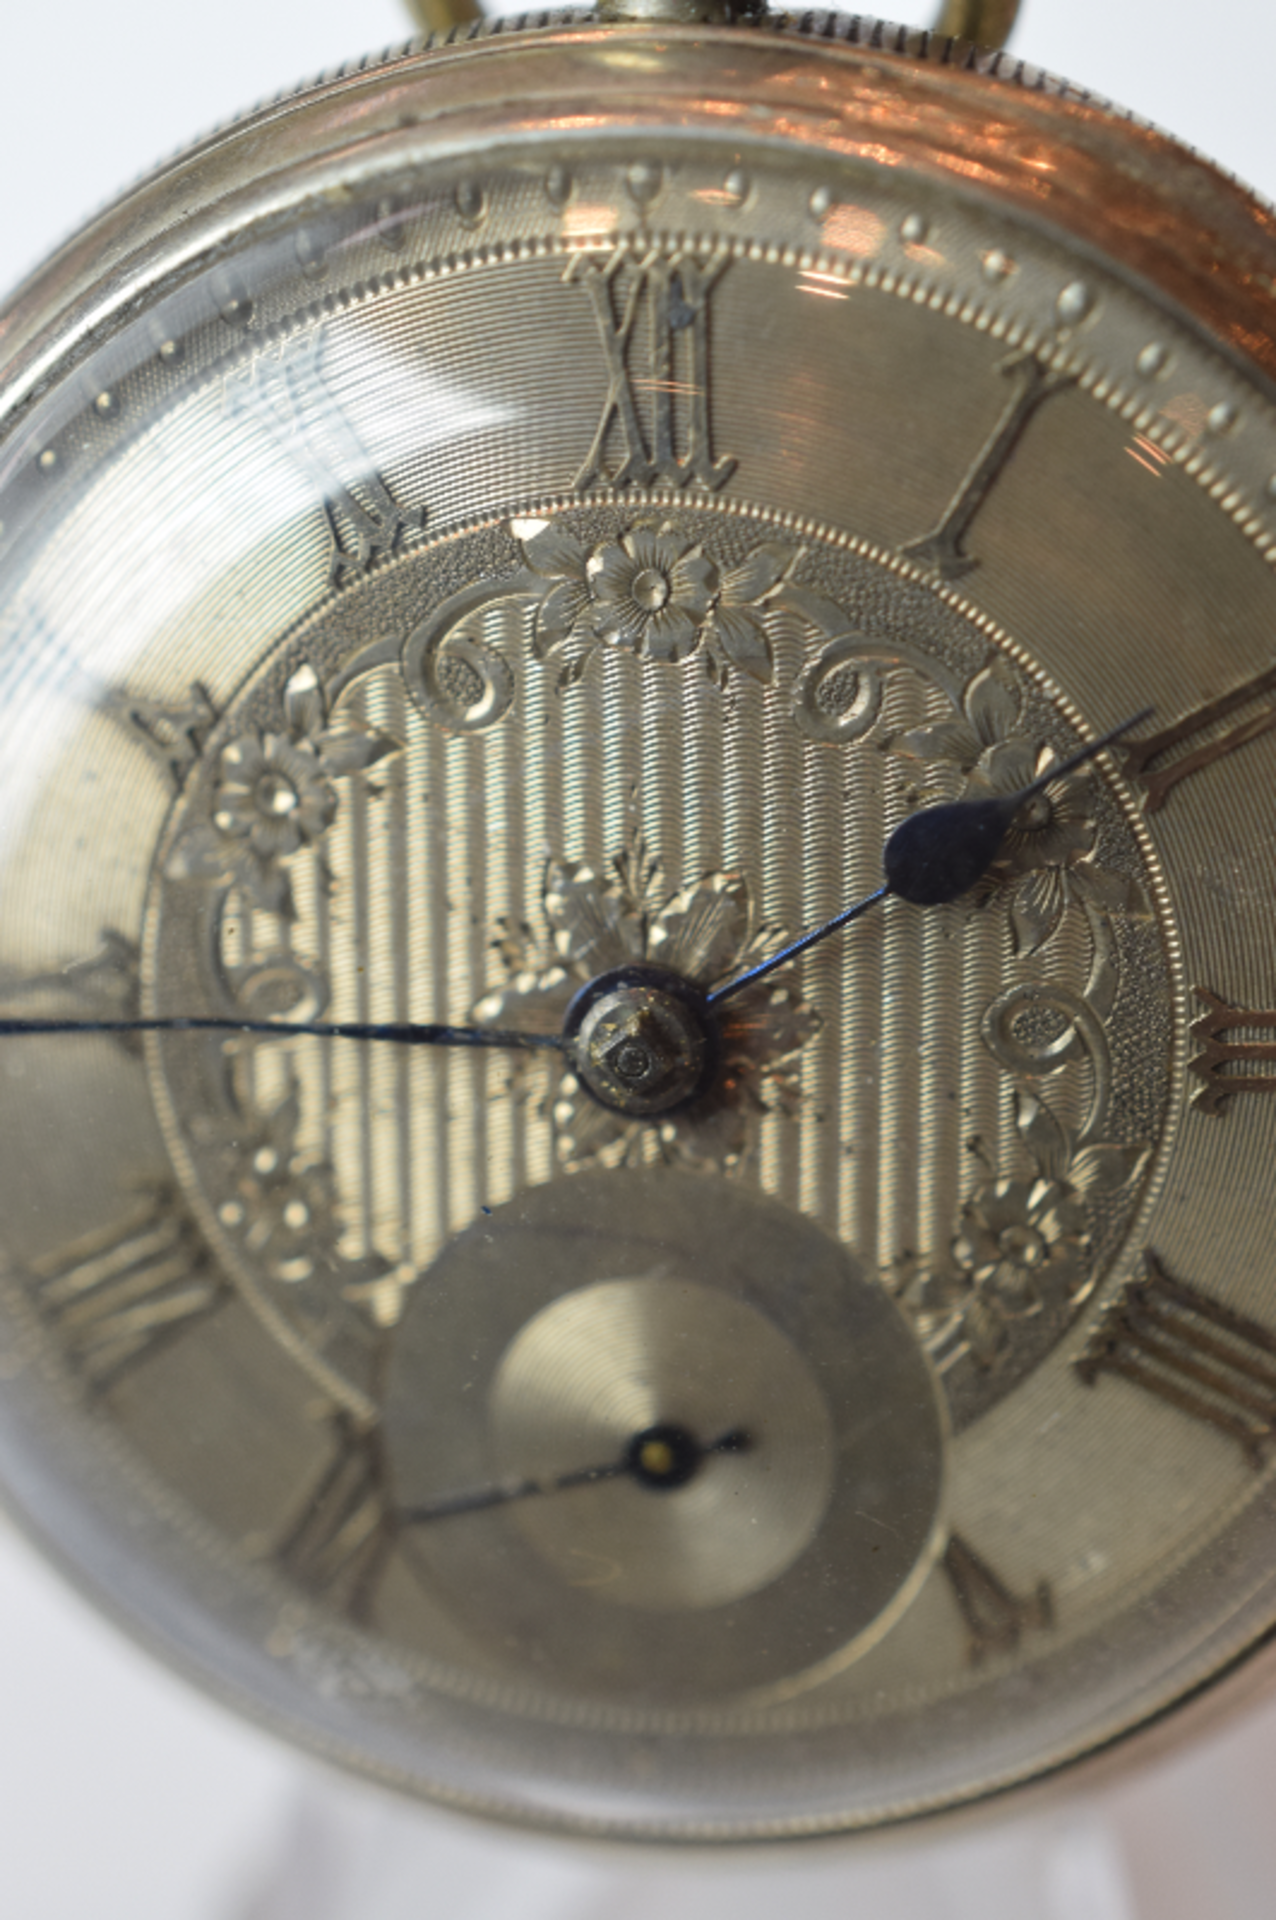 Open Face Silver Pocket Watch With Engraving Roman Numerals - Image 3 of 5